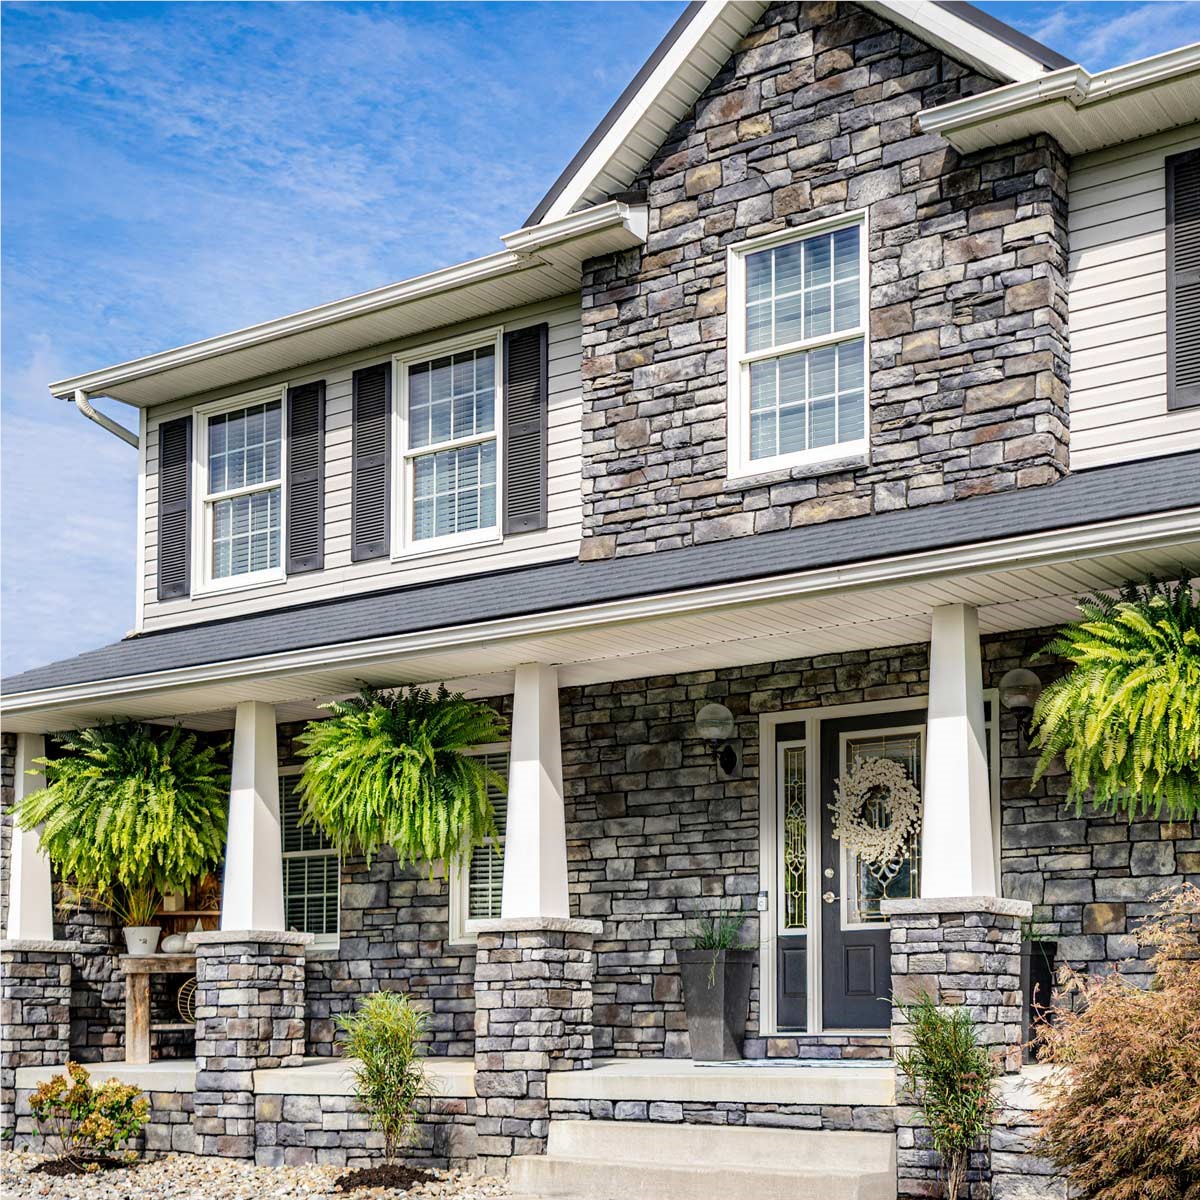 Why You Should Choose Stone or Shake Siding Options for Your Home